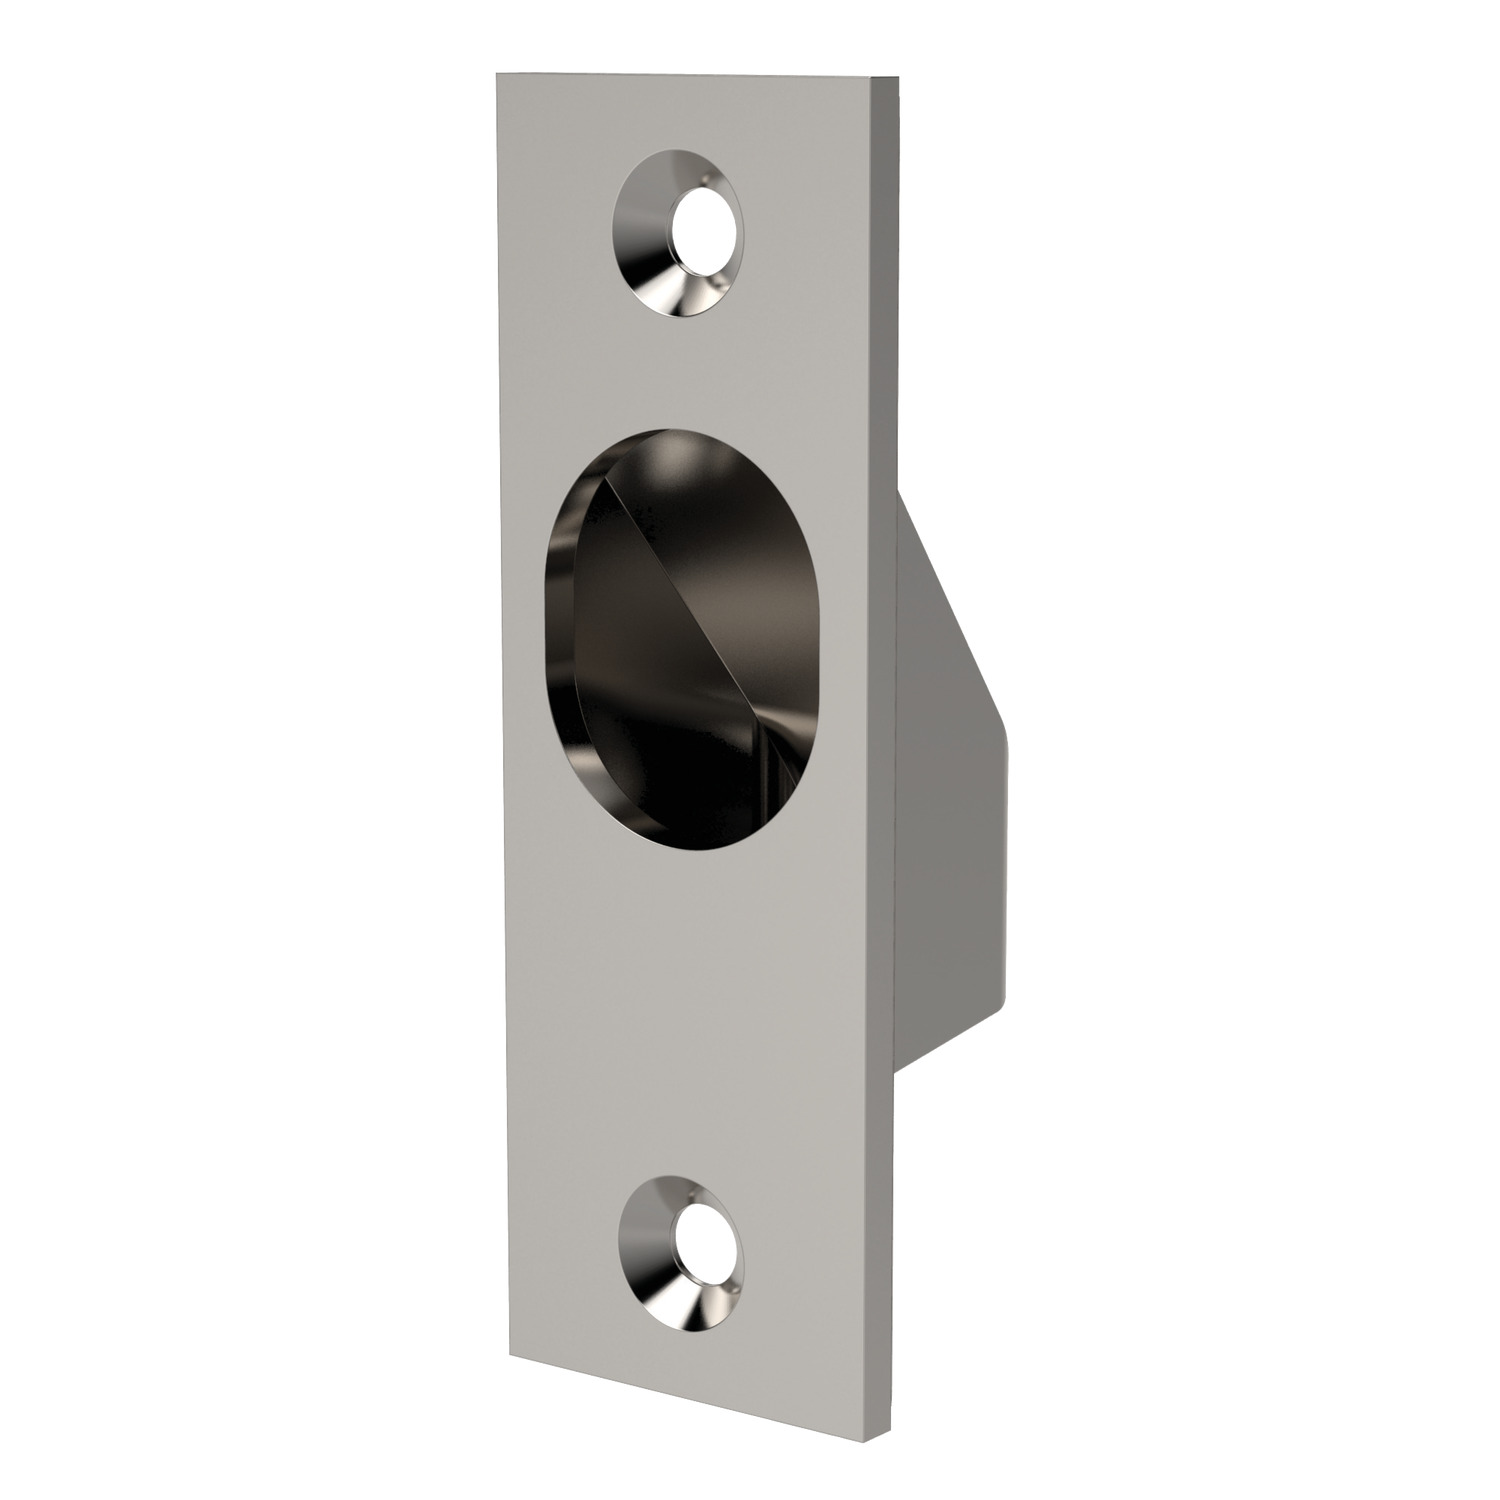 Finger Pulls, Recessed Satinin finish AISI 304 stainless steel. Compact finger pull design for use in doors or enclosures of minimum thickness of 30mm.